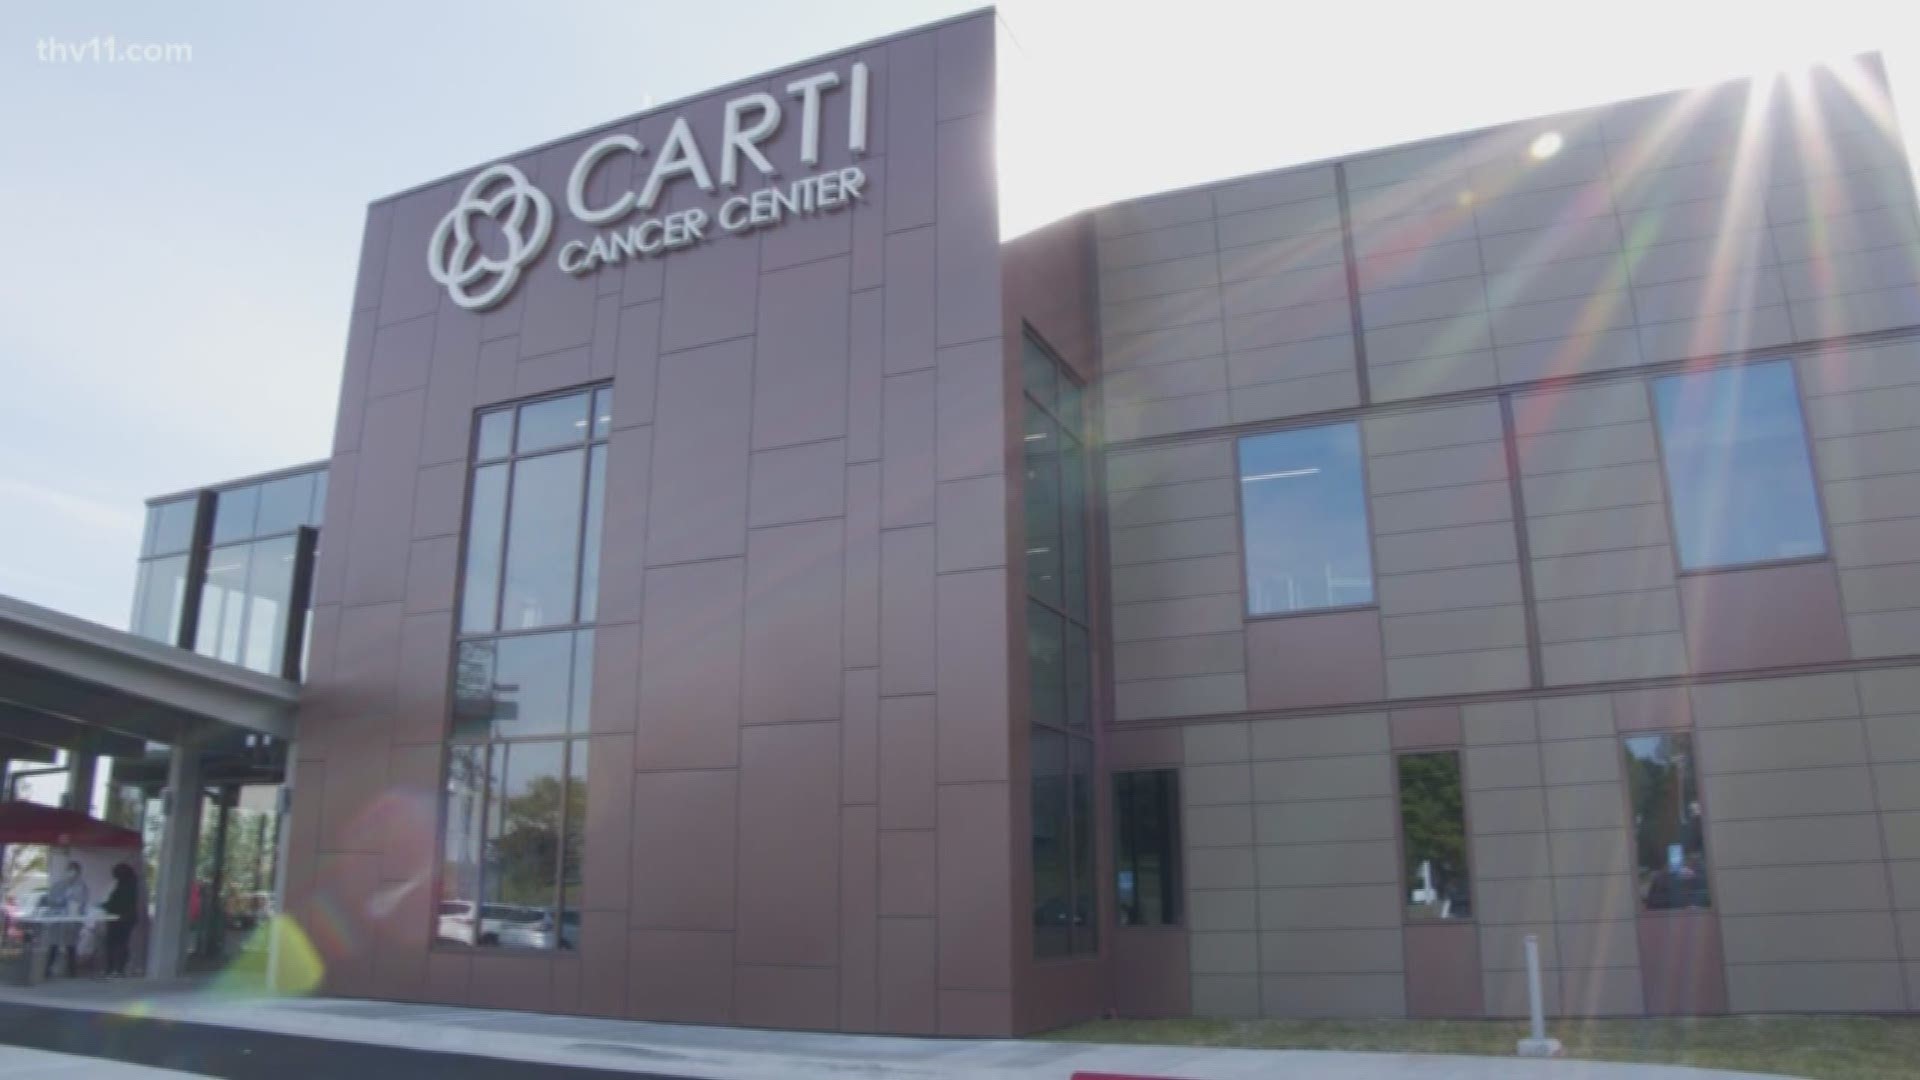 CARTI's new North Little Rock cancer center officially opened this week, two weeks ahead of schedule.